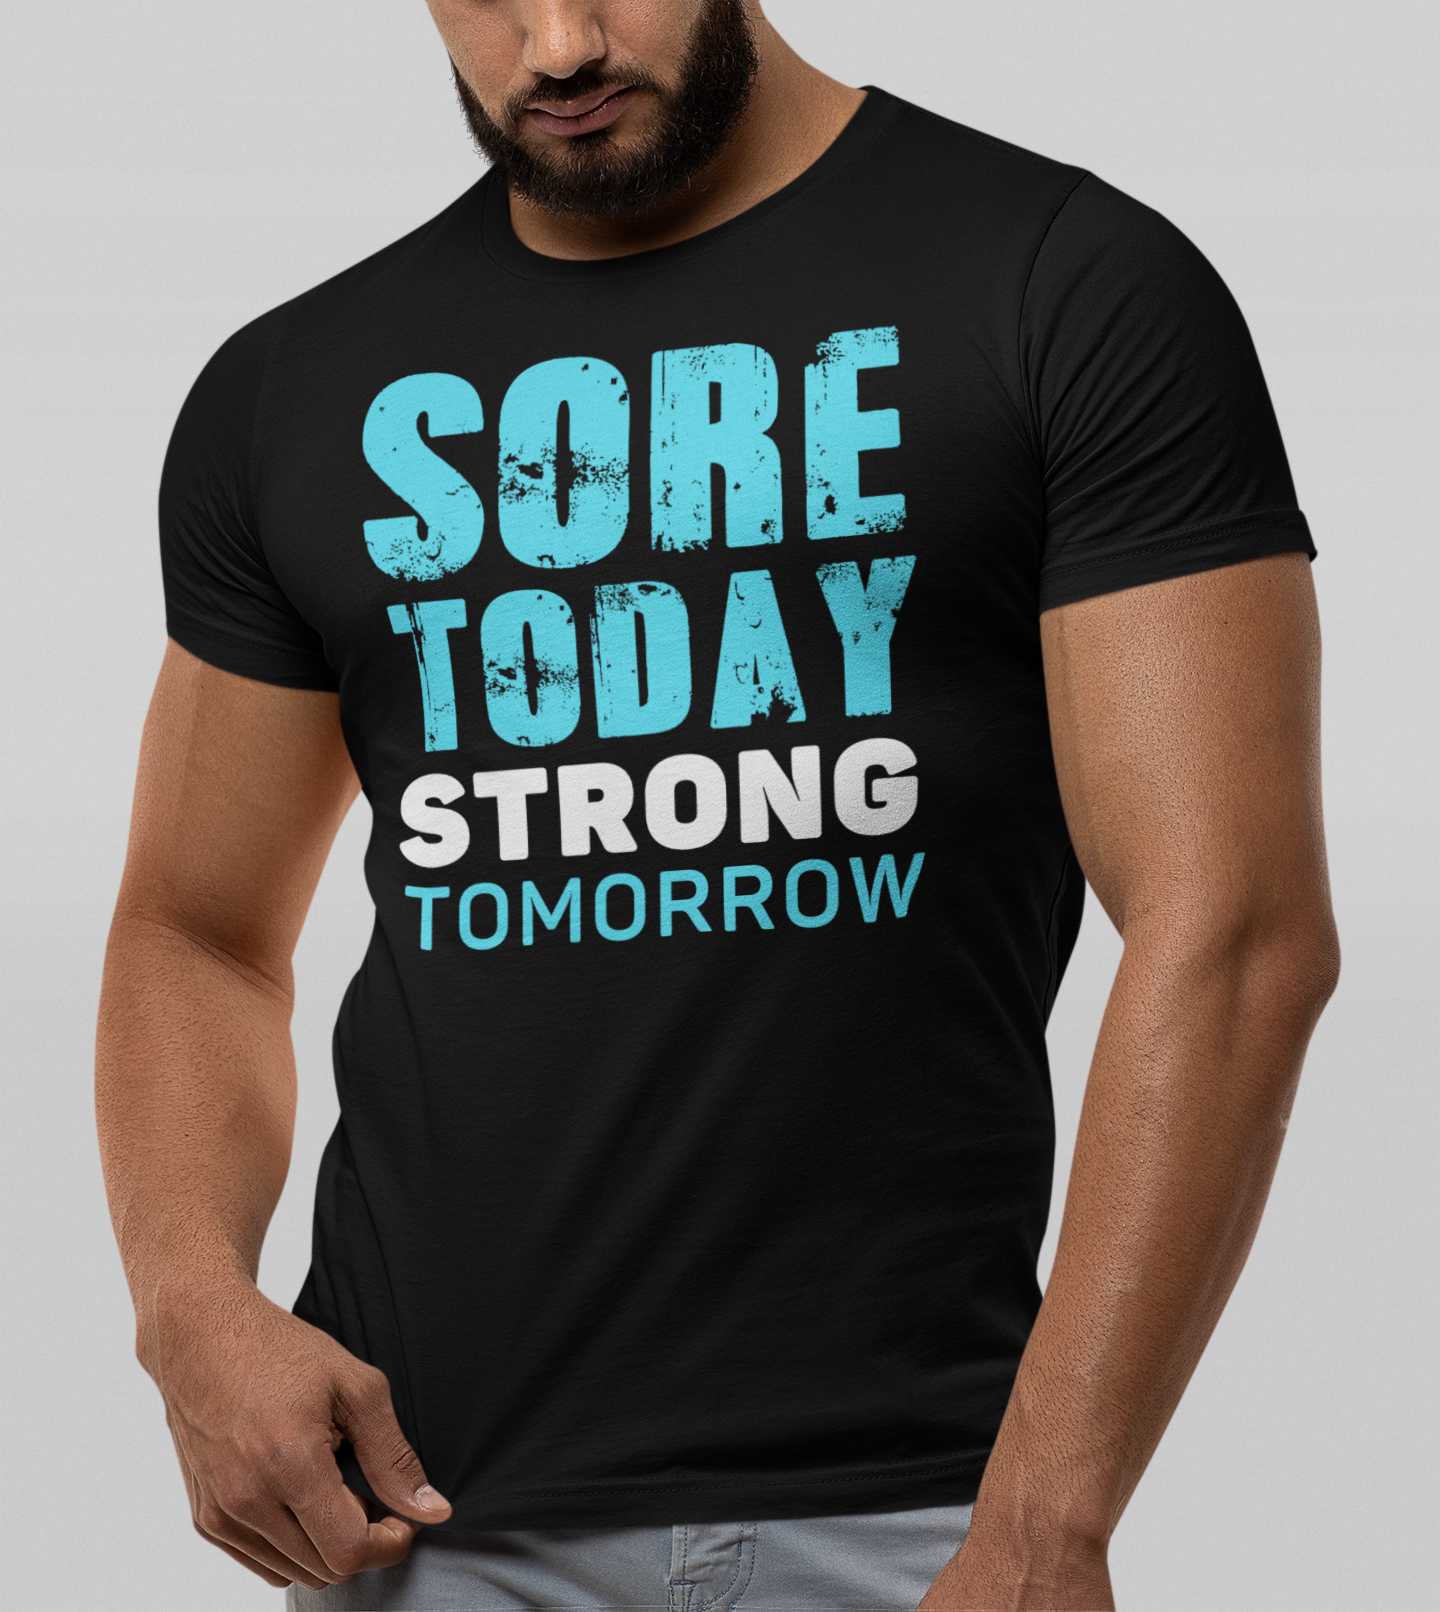 Sore Today Strong Tomorrow - Gym T-Shirt Strong Soul Shirts & Tops